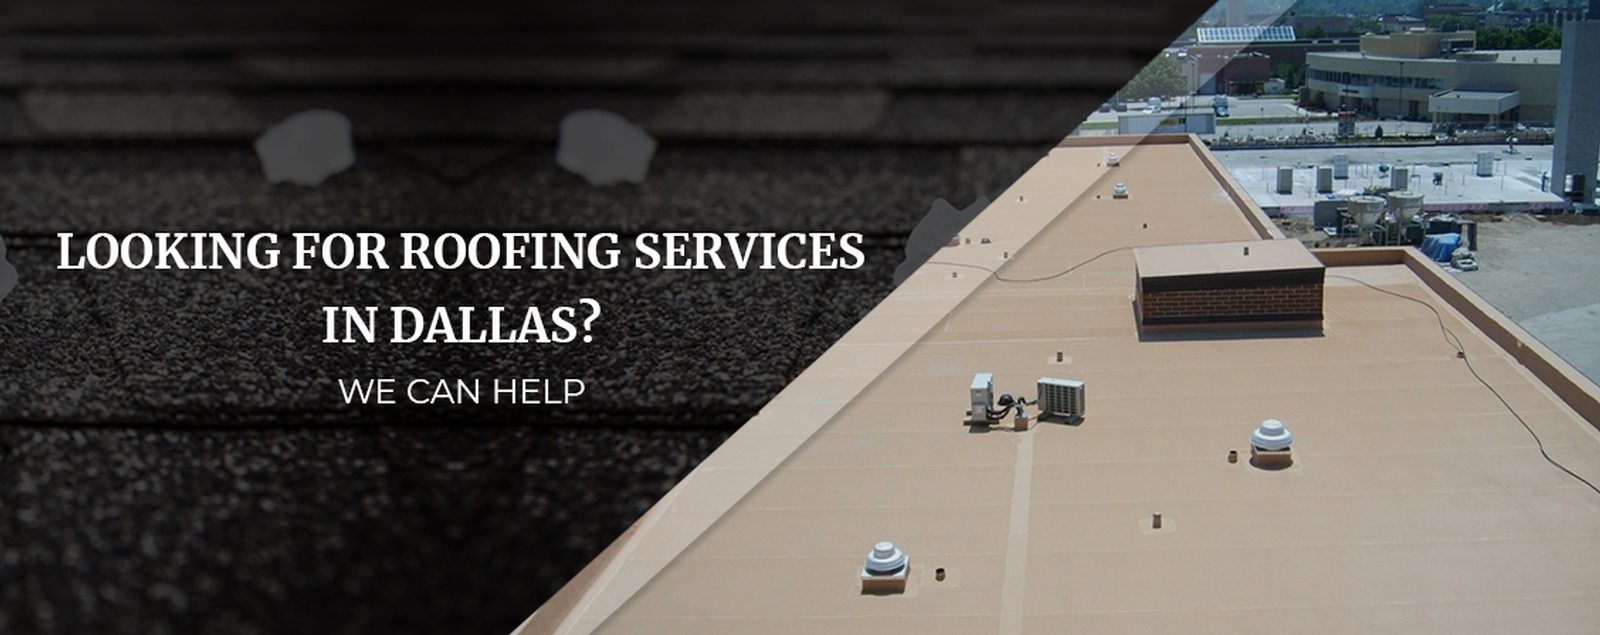 Looking For Roofing Services In Dallas We Can Help